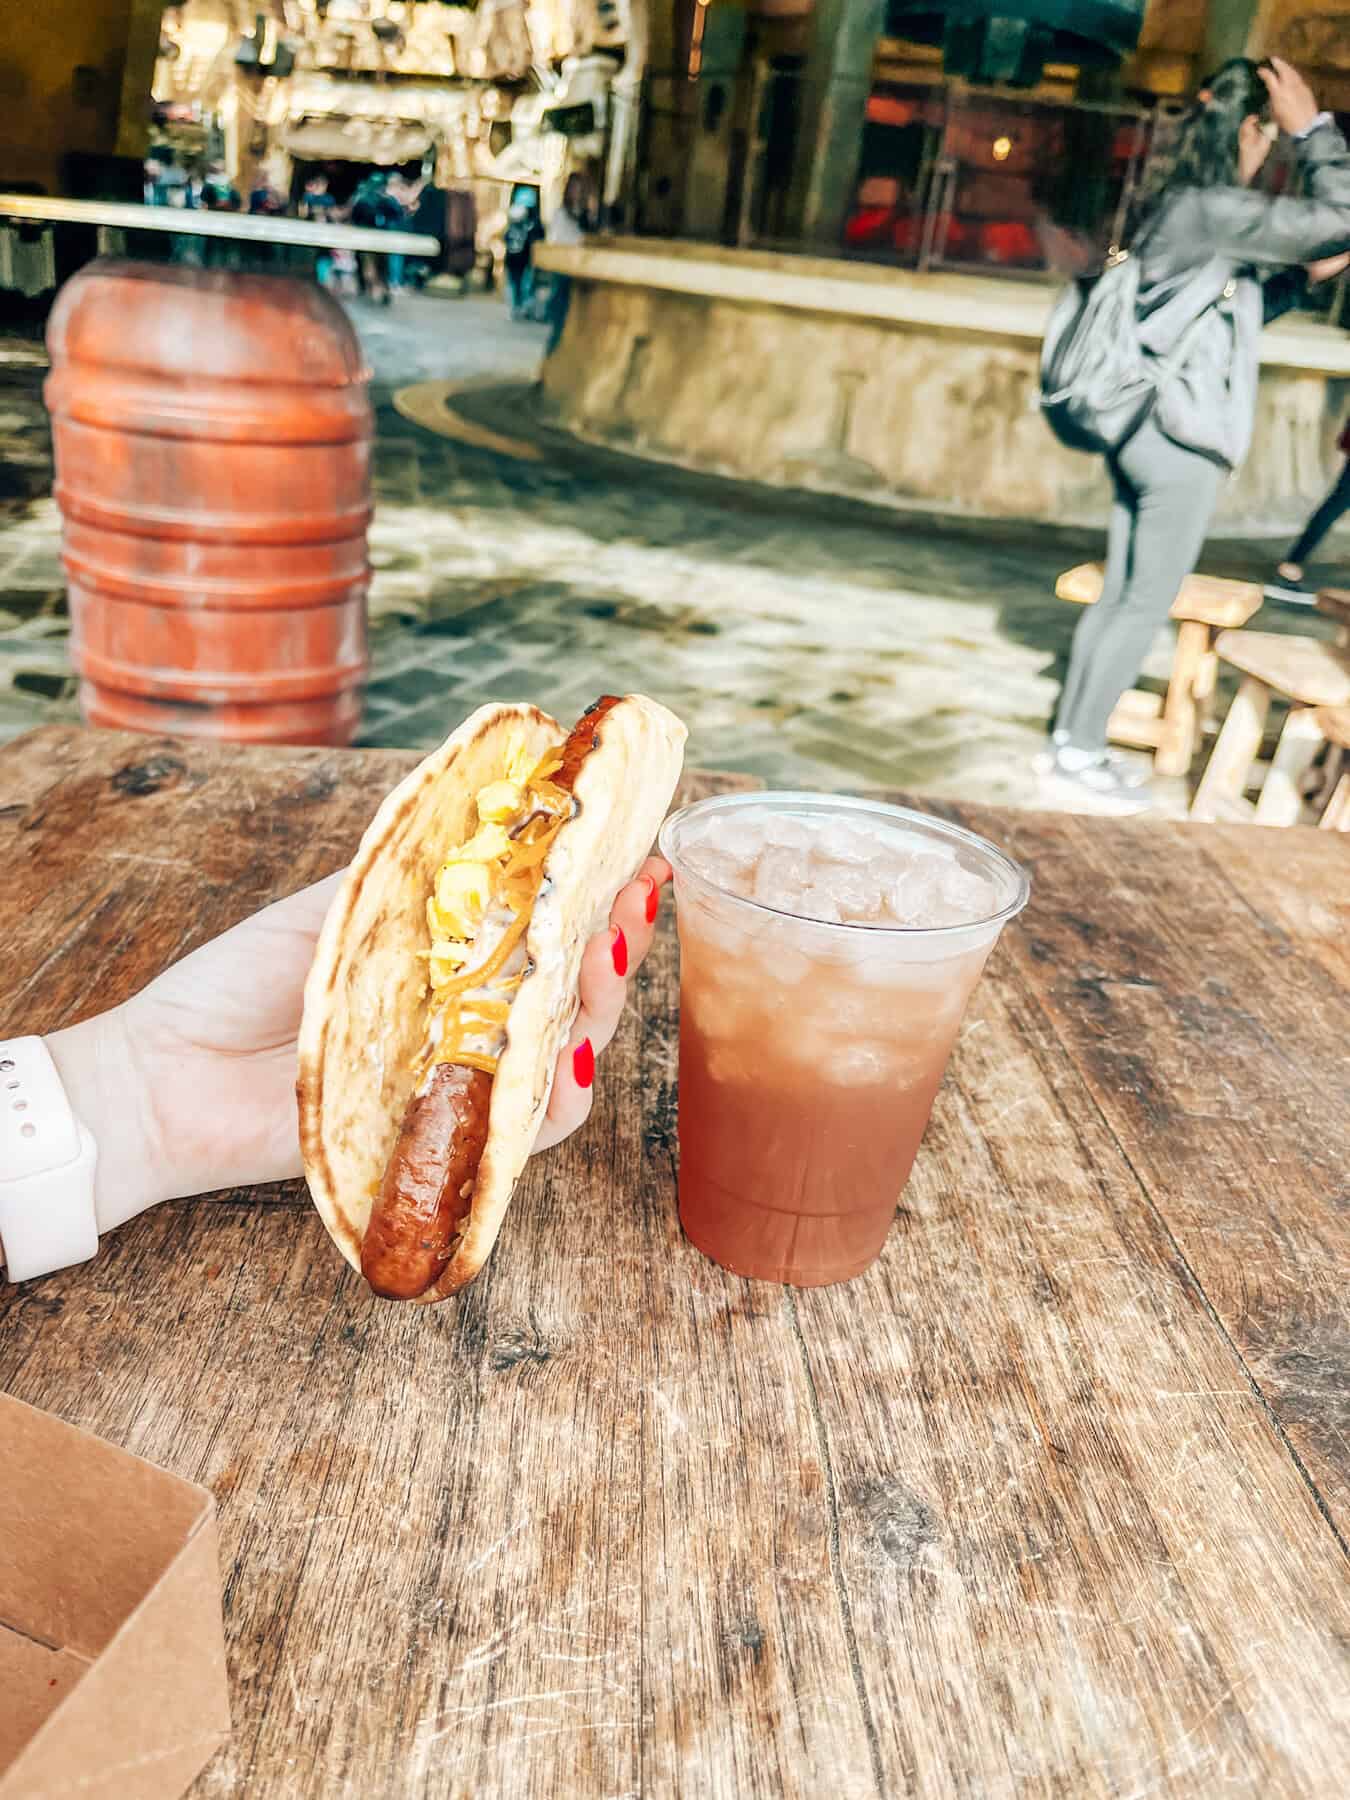 A hand with red-painted nails holds a Ronto Wrap, consisting of grilled sausage, slaw, and sauce wrapped in flatbread, over a rustic wooden table. Next to the wrap is a plastic cup filled with an iced beverage, with a blurred, themed setting in the background.